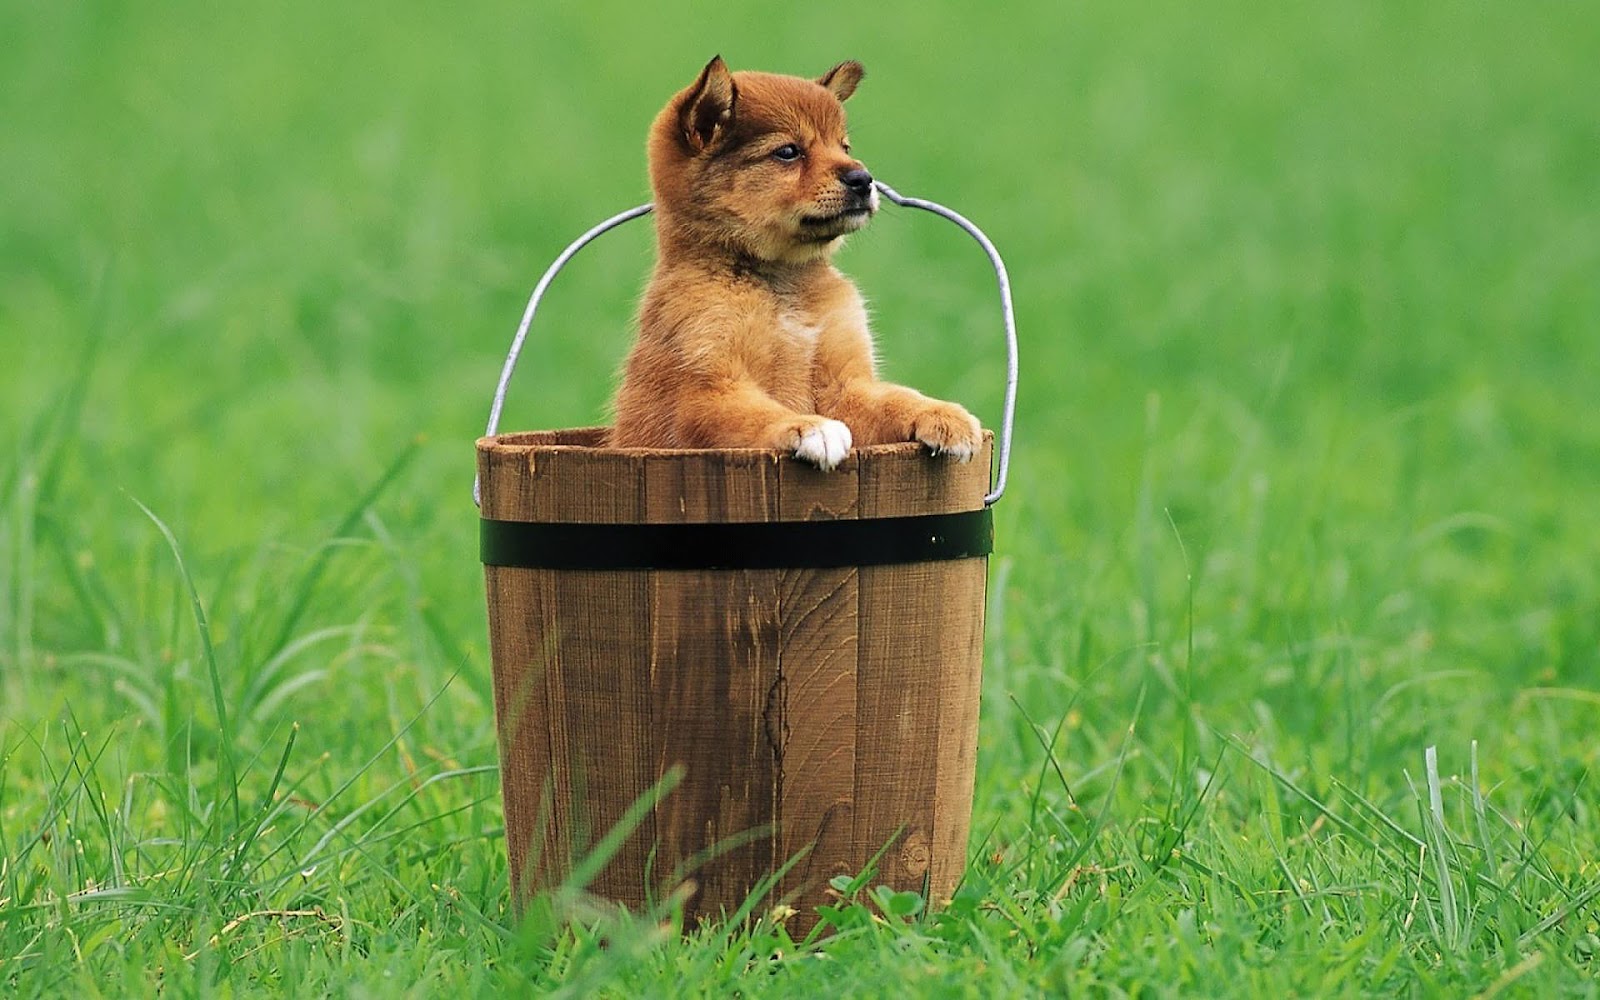 hd dog wallpaper with a little puppy dog in a wooden bucket hd dog